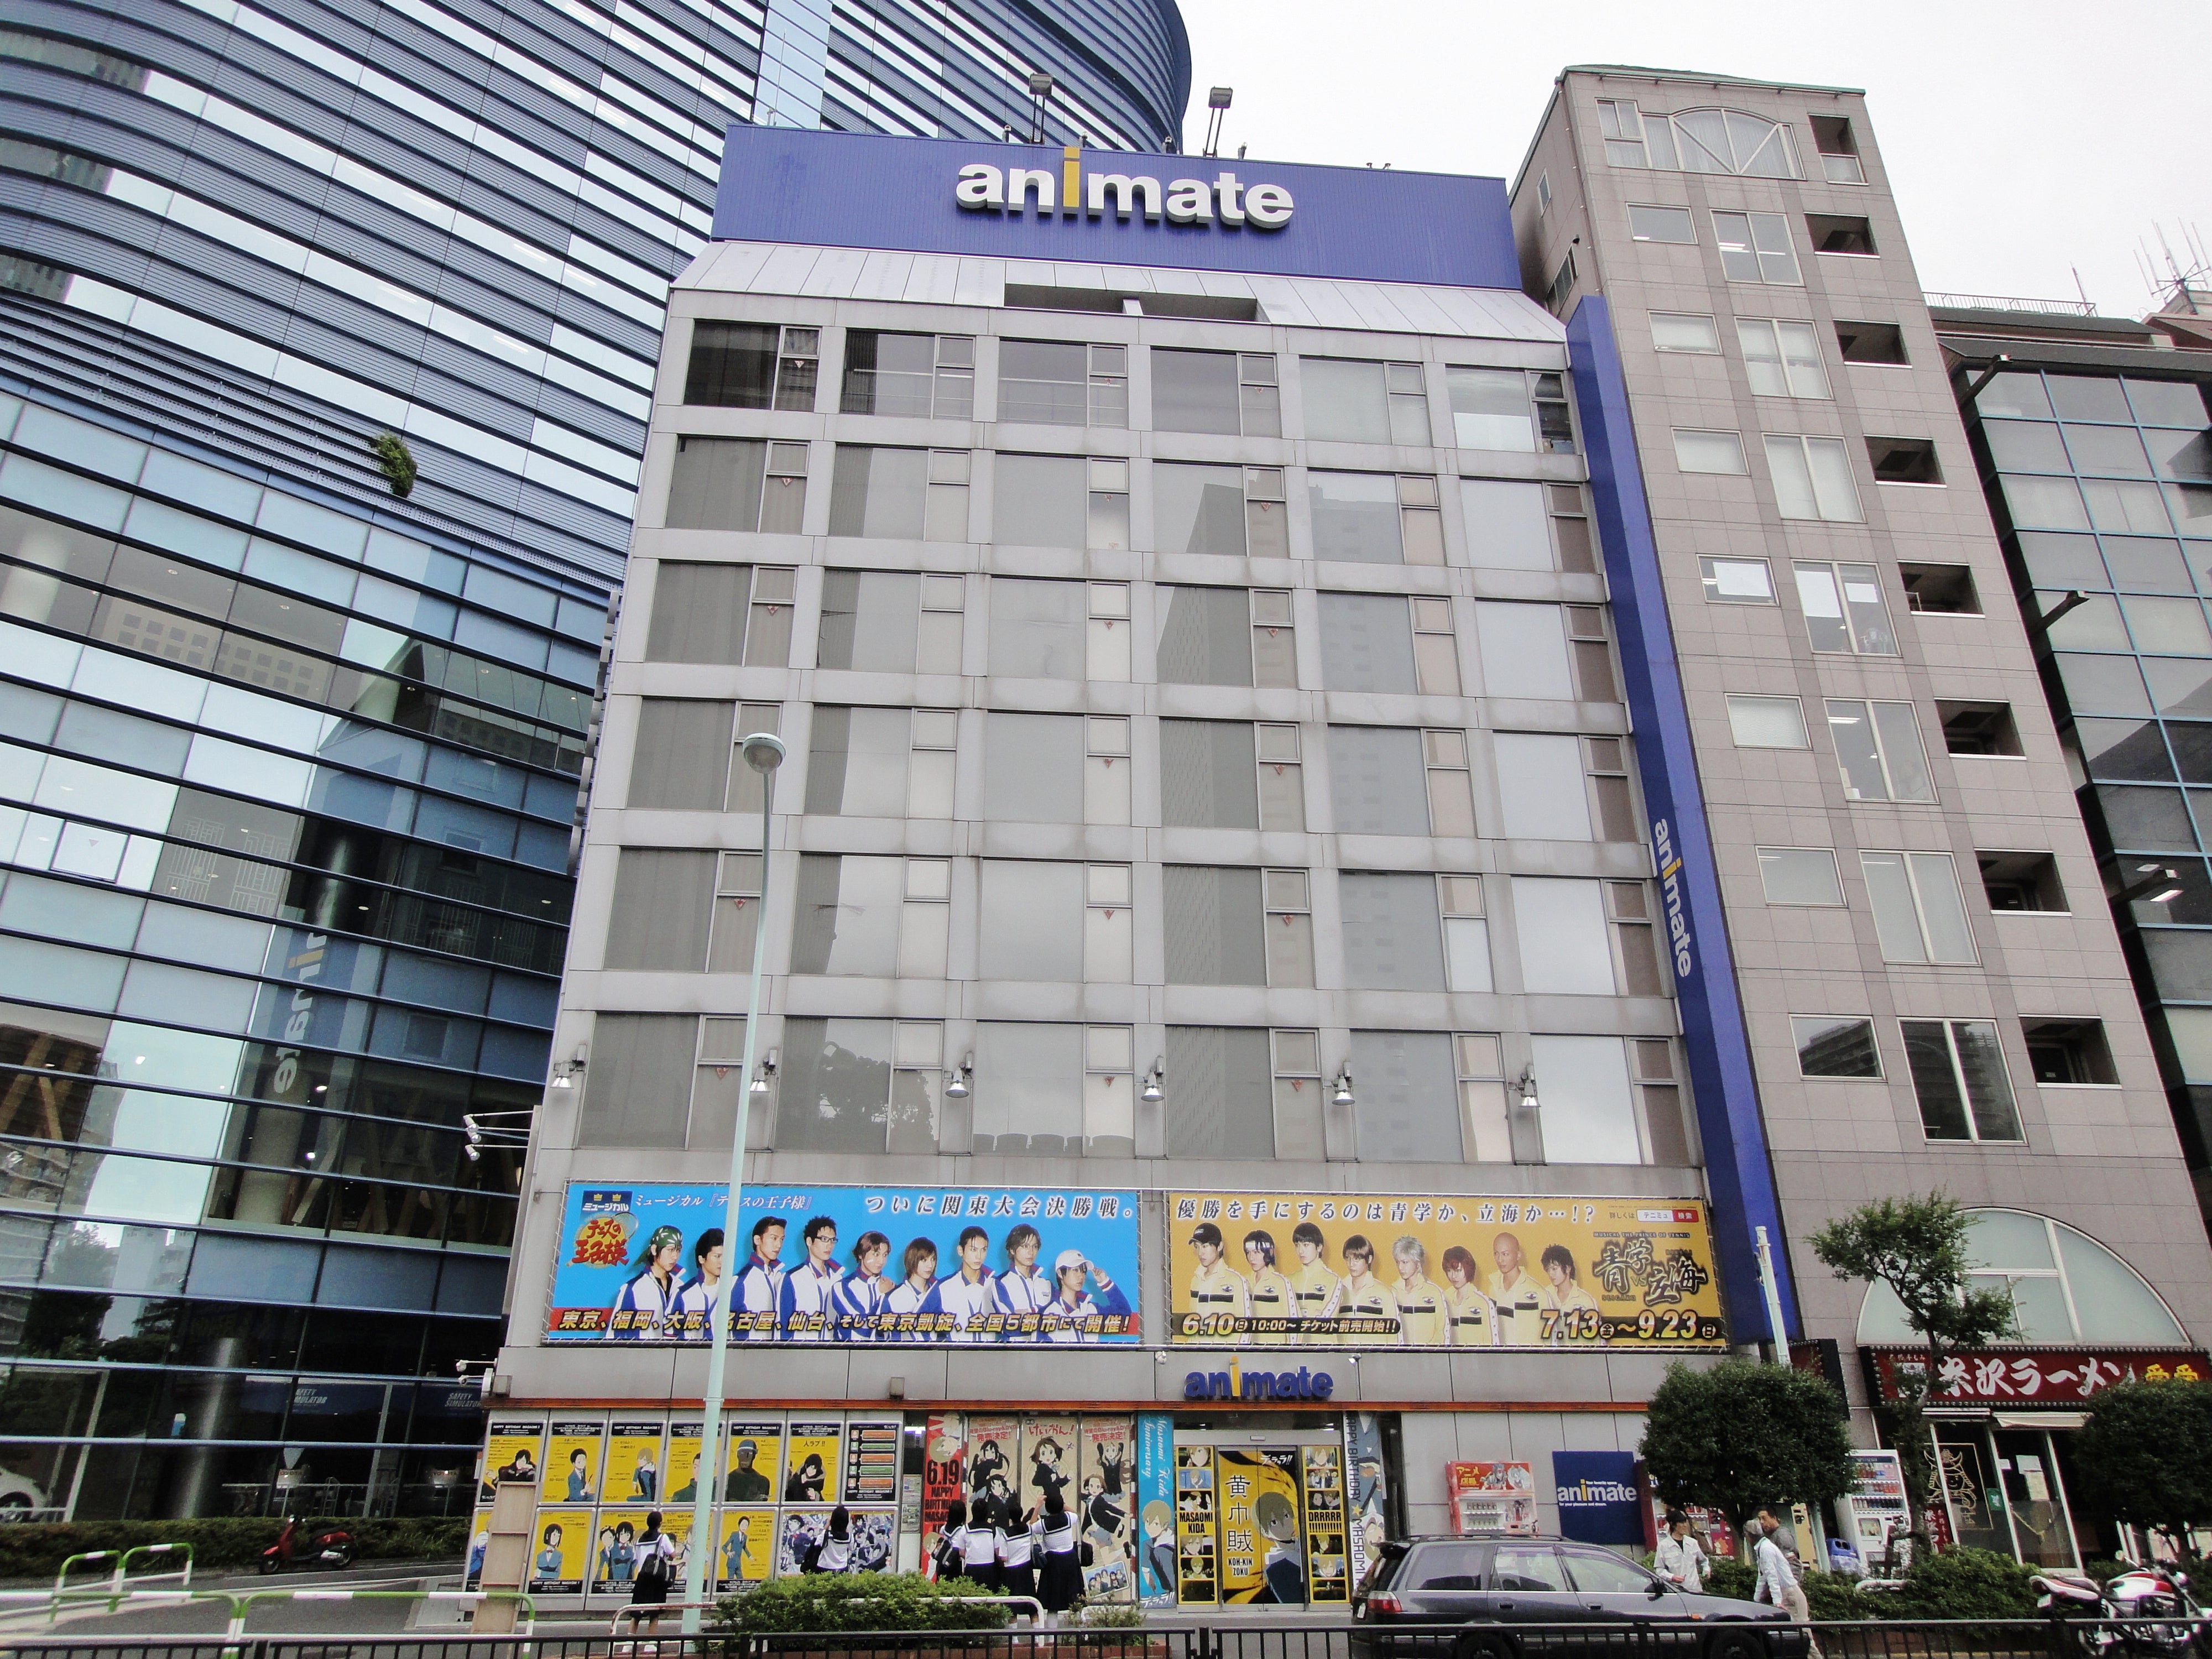 Animate's Ikebukuro Shop Expands To Become The World’s Biggest Anime Shop